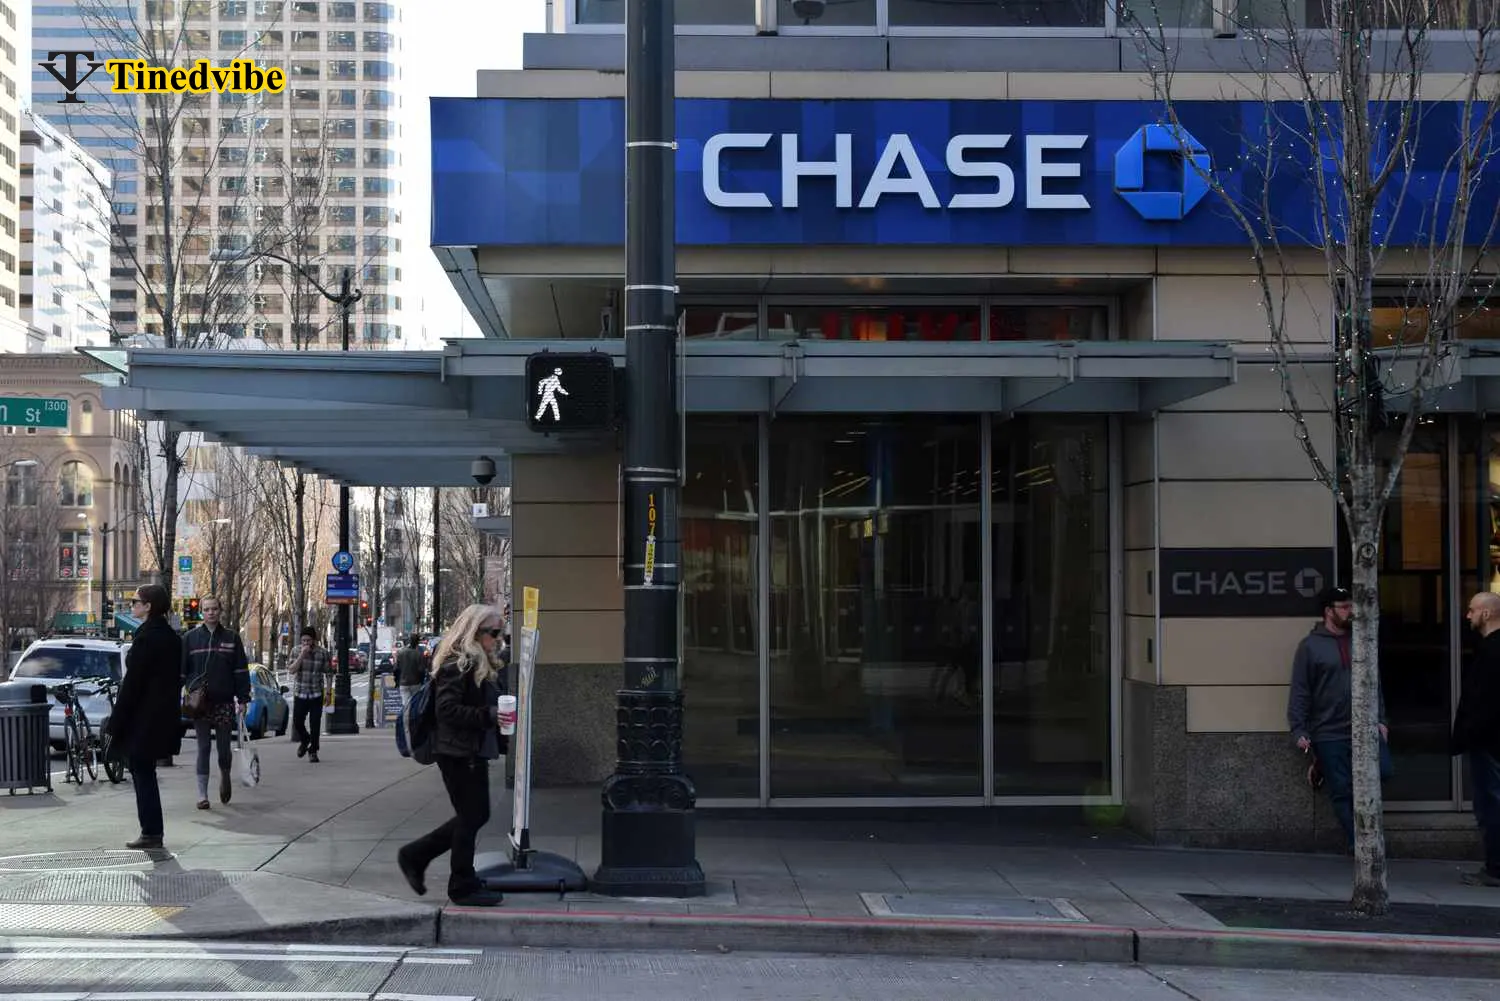 Closest Chase Bank to Your Location - Chase Banks Closed Today